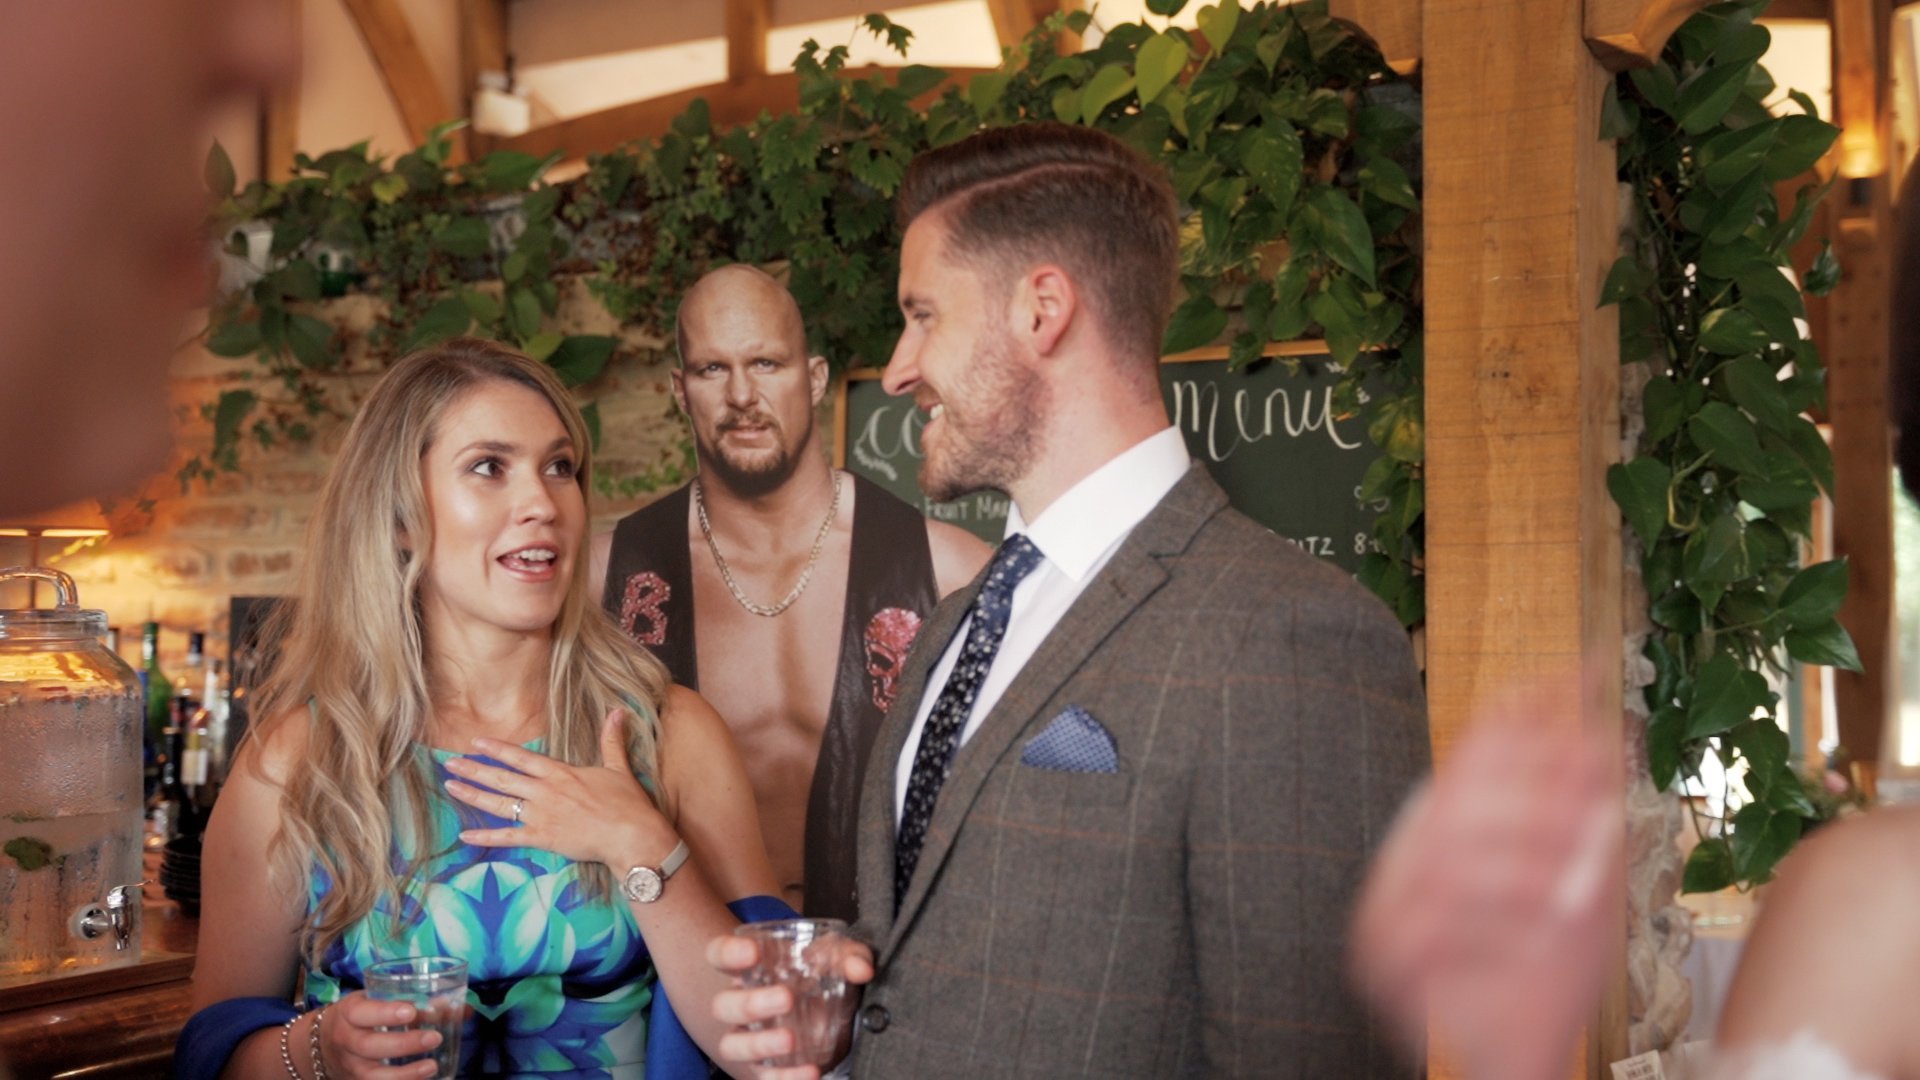 Wedding guests wearing formal attire chatting and standing in front of lifesized wrestling cut out